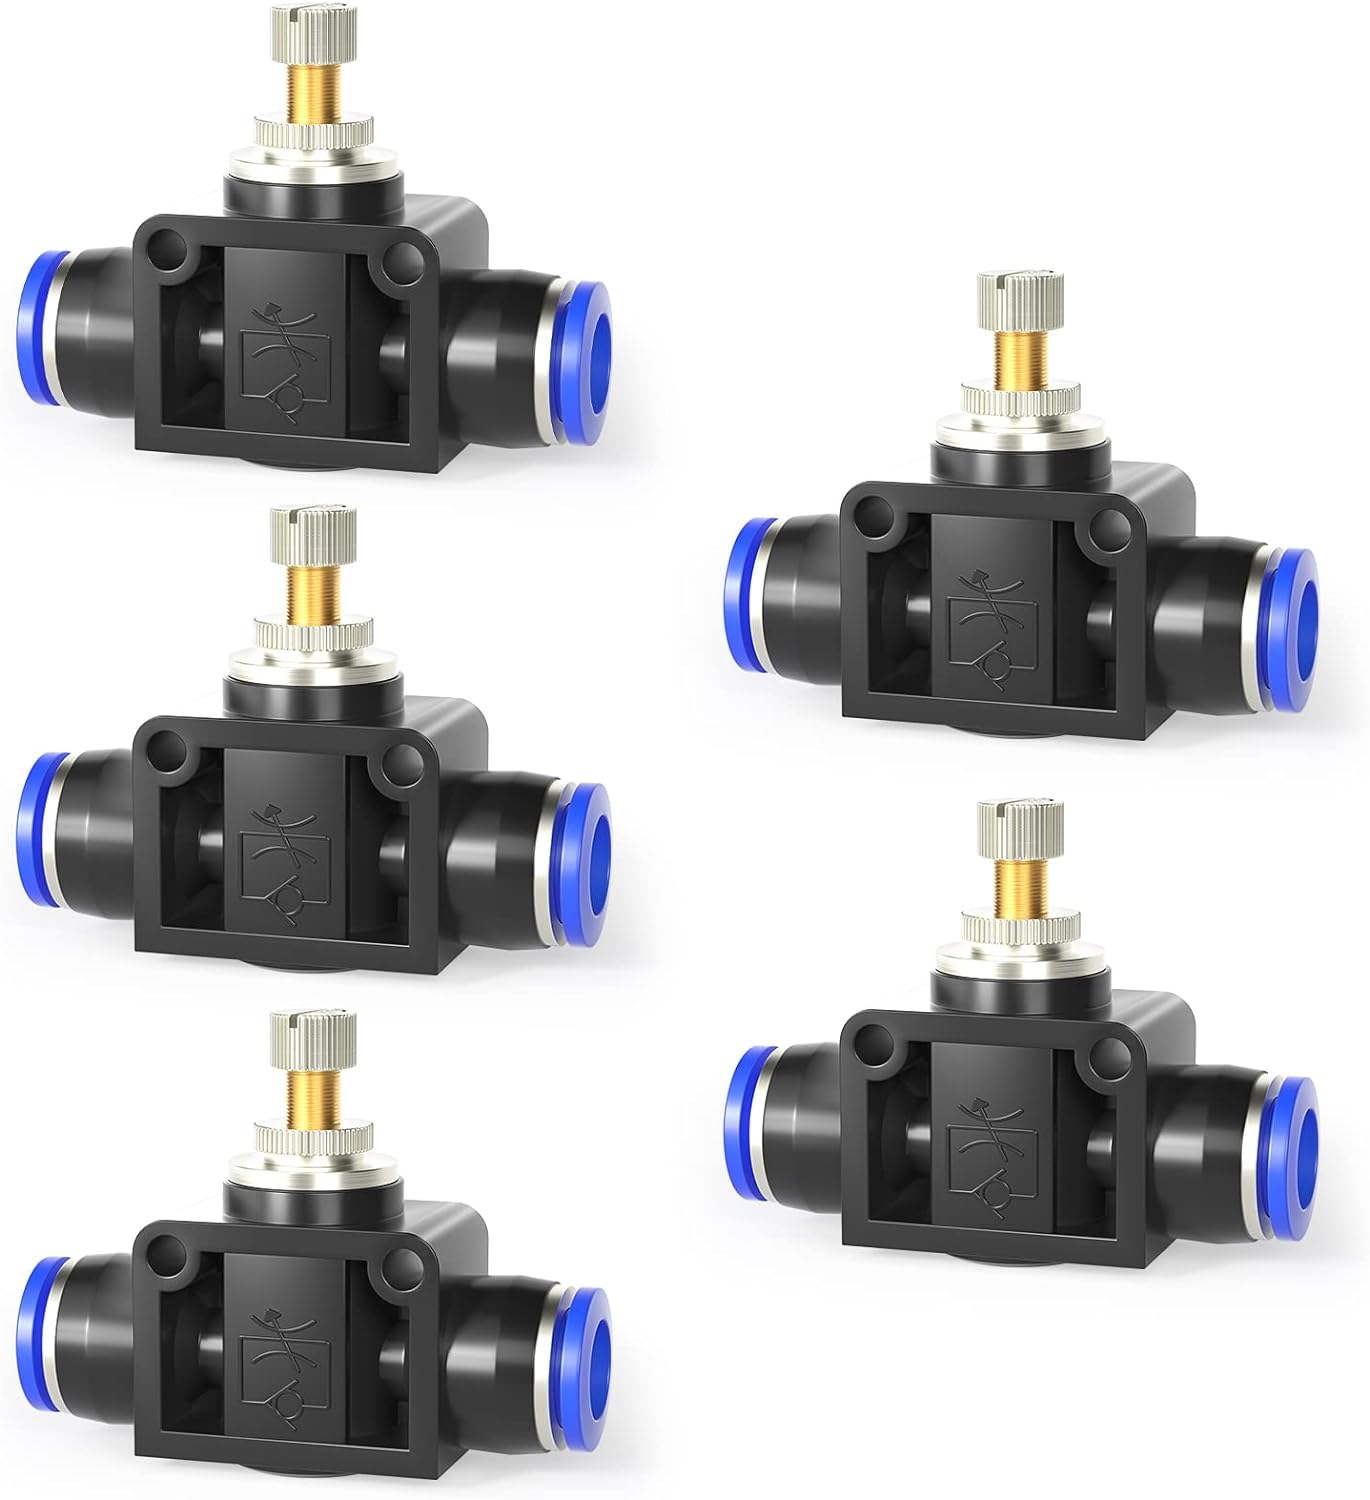 6MM Tube OD x 6MM Tube OD SCF-6 （Pack of 1） in-Line Speed Controller Union Straight TAILONZ PNEUMATIC Air Flow Control Valve with Push-to-Connect Fitting